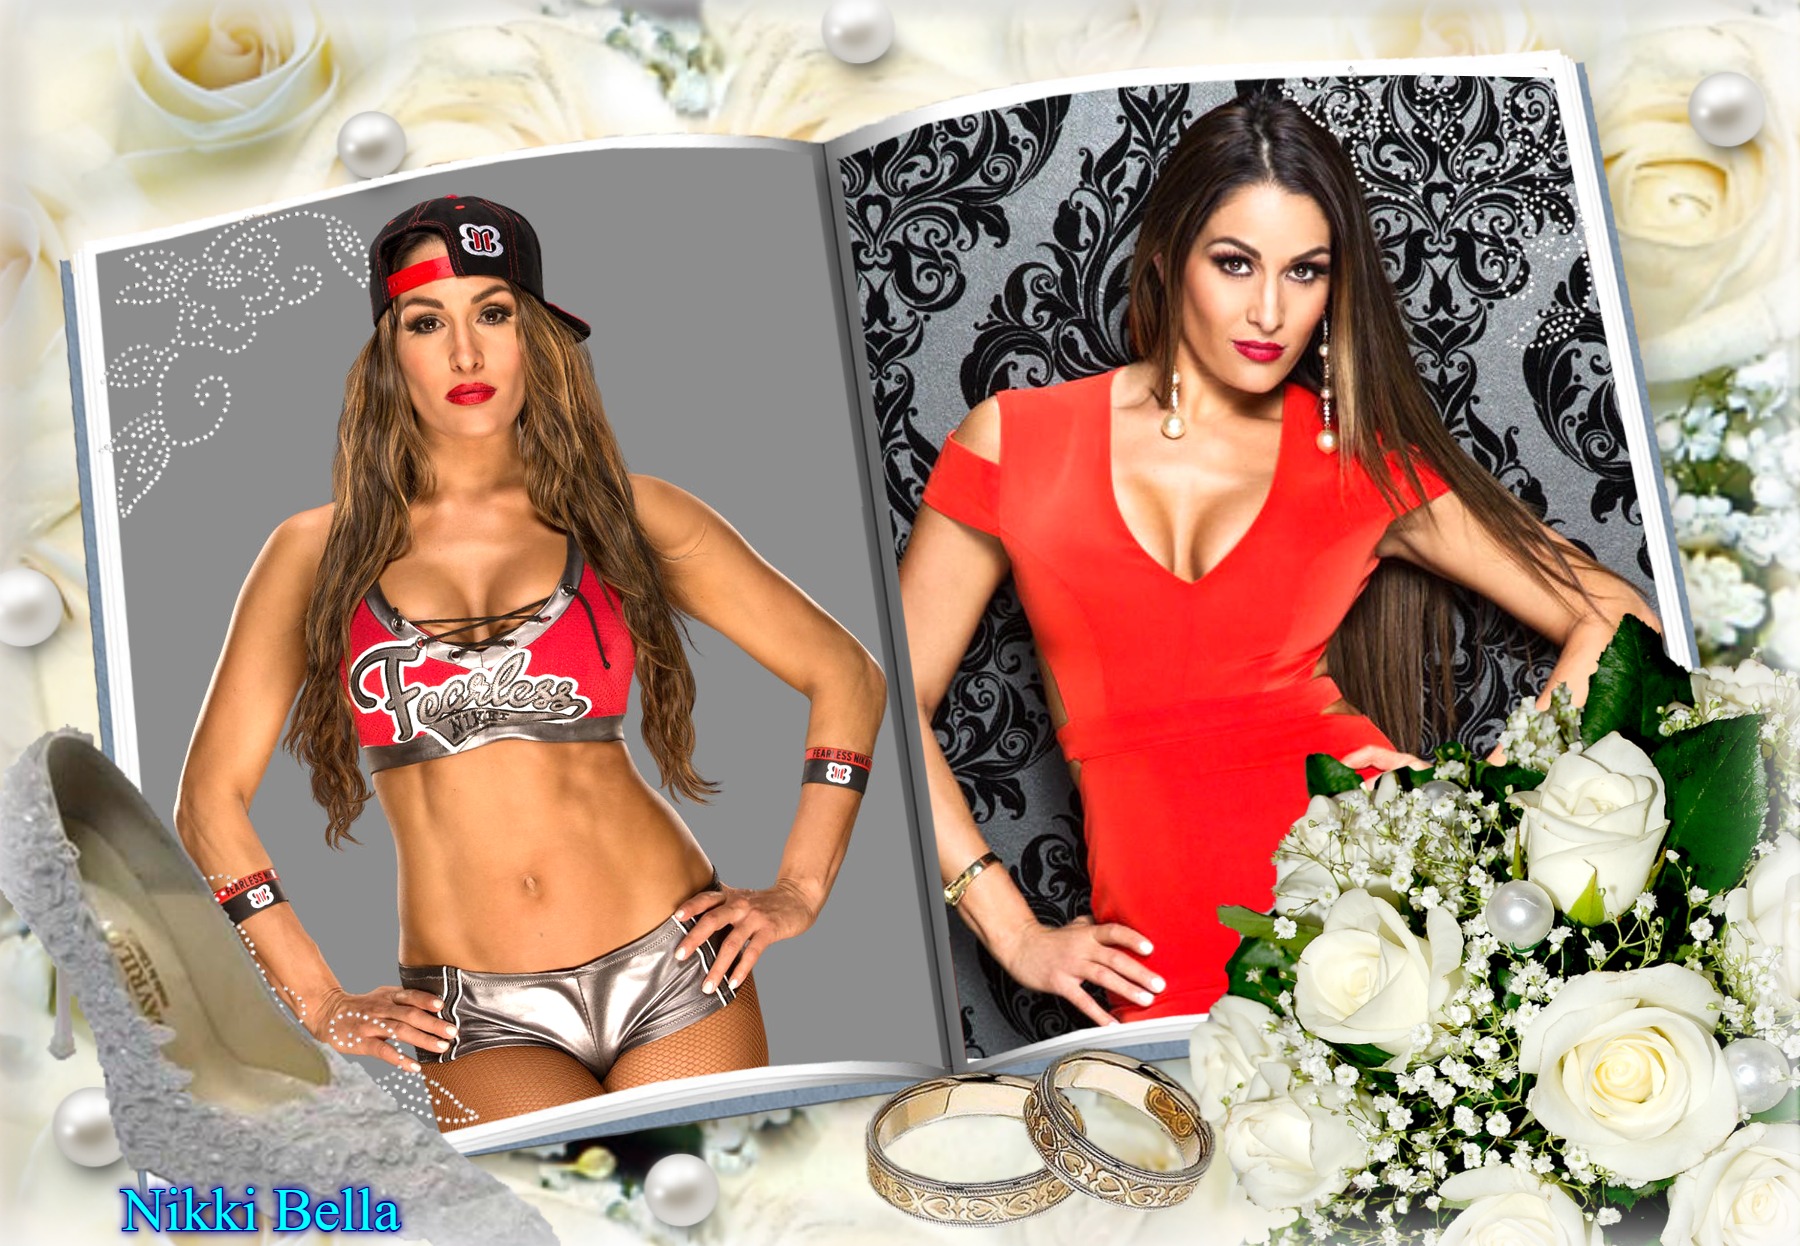 Read more about the article “Nikki Bela-Sizzling WWE Diva”